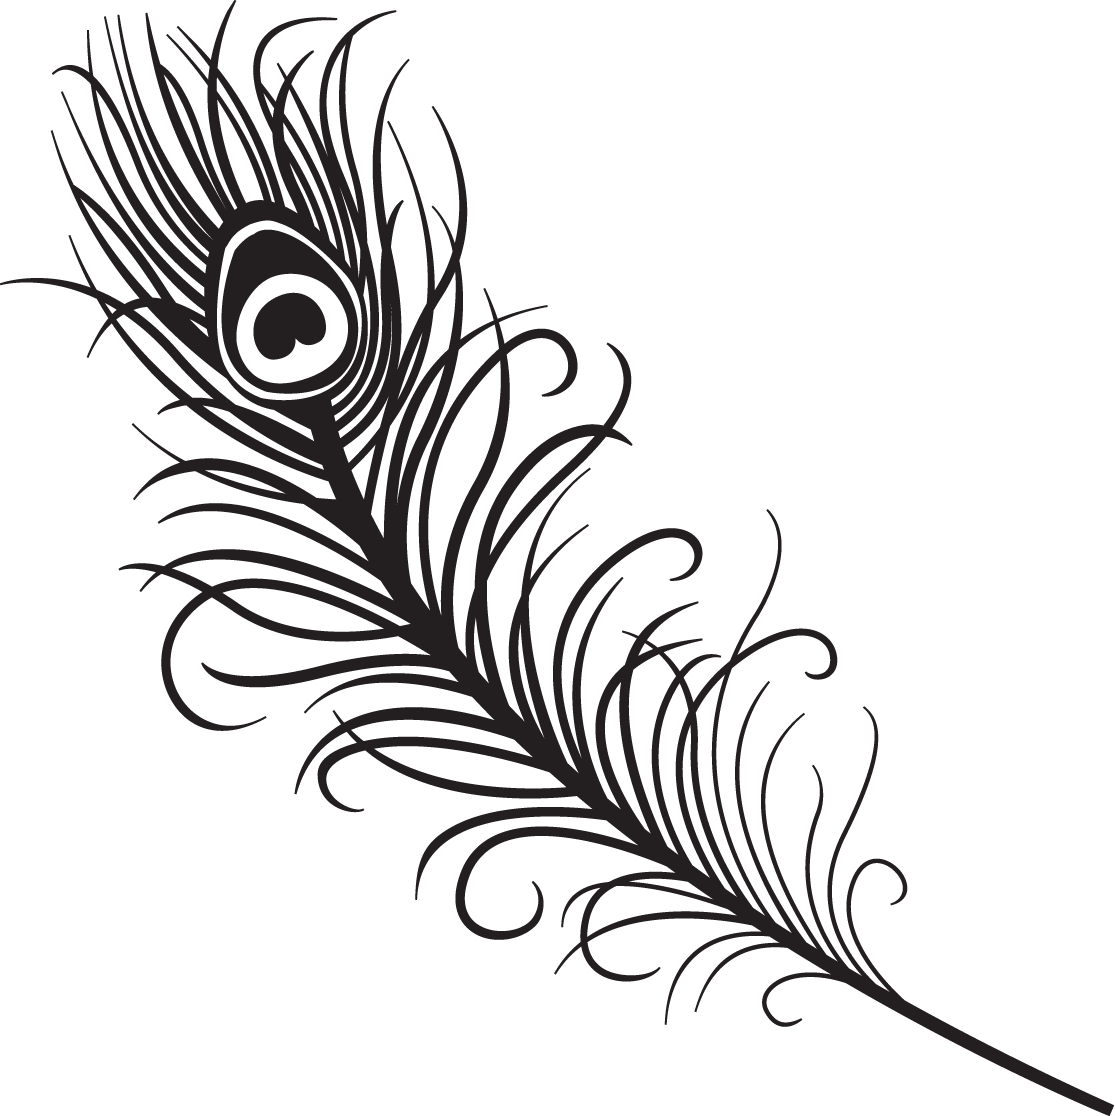 How to draw a peacock feather